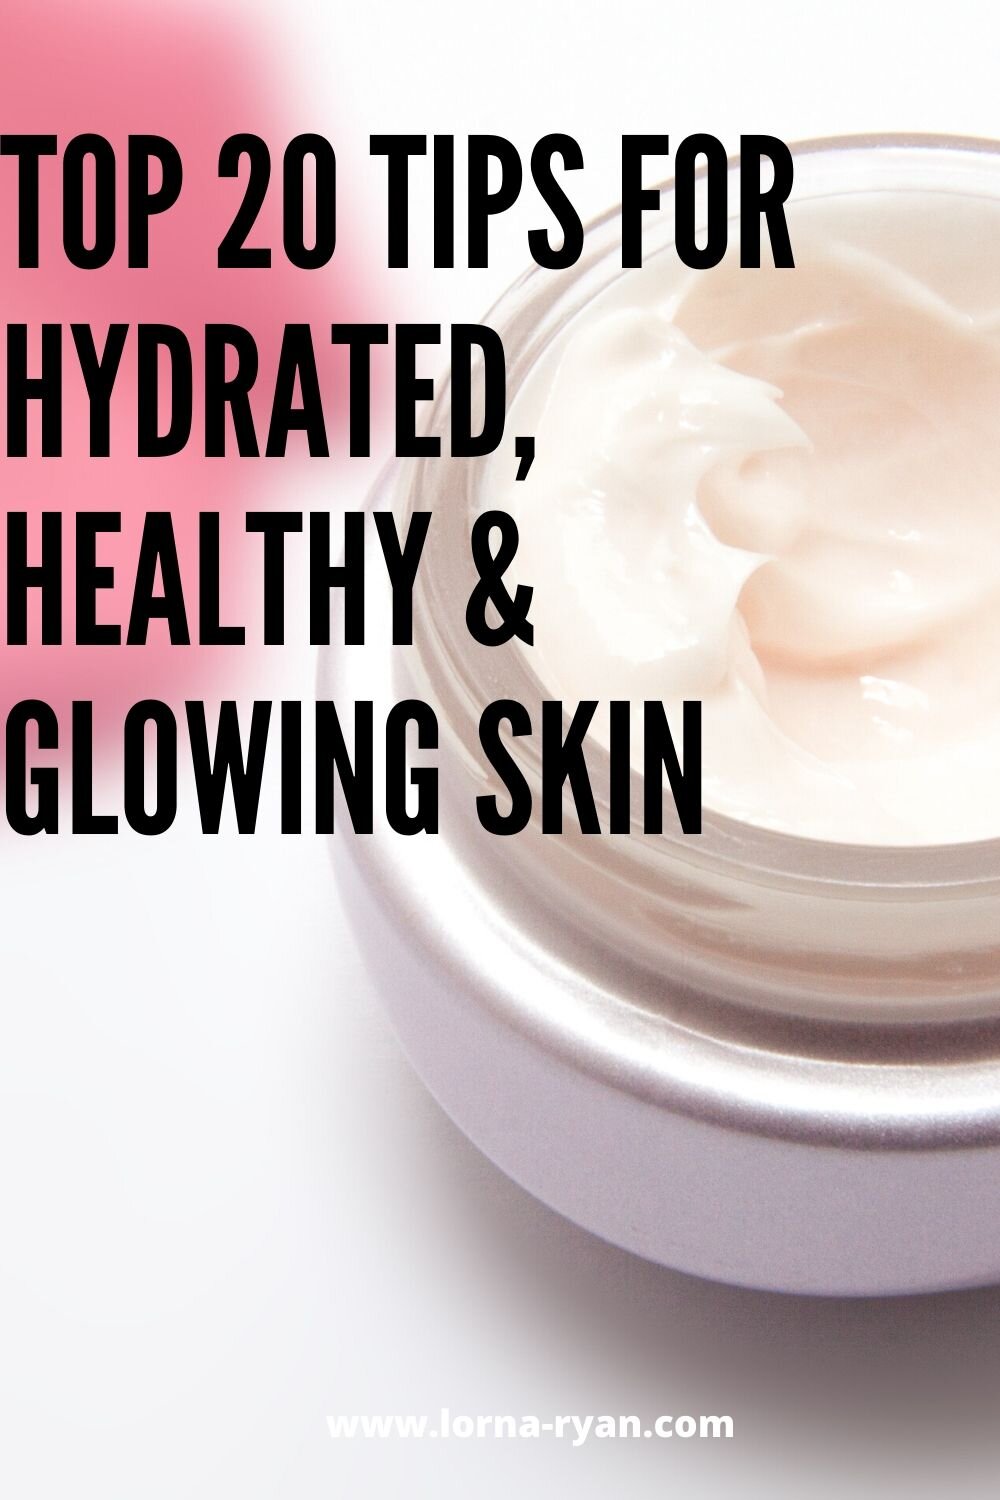 How to Have a Clear Skin: 20 Great Tips For A Healthy & Clear Skin